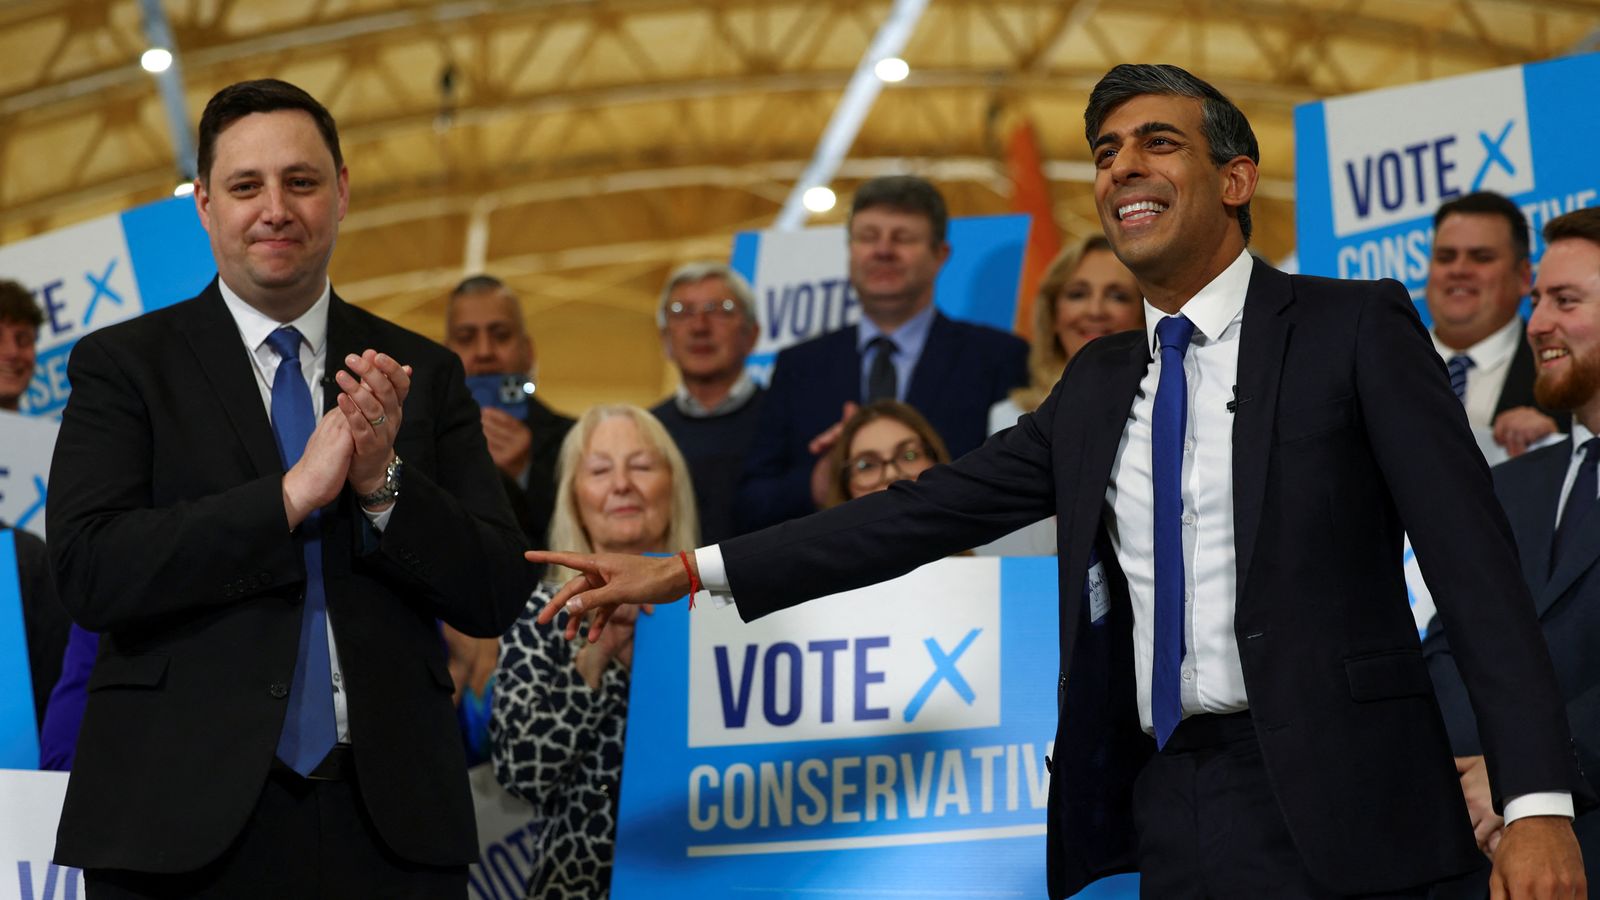 sunak urges tories to stick with his leadership after party suffers shock election losses